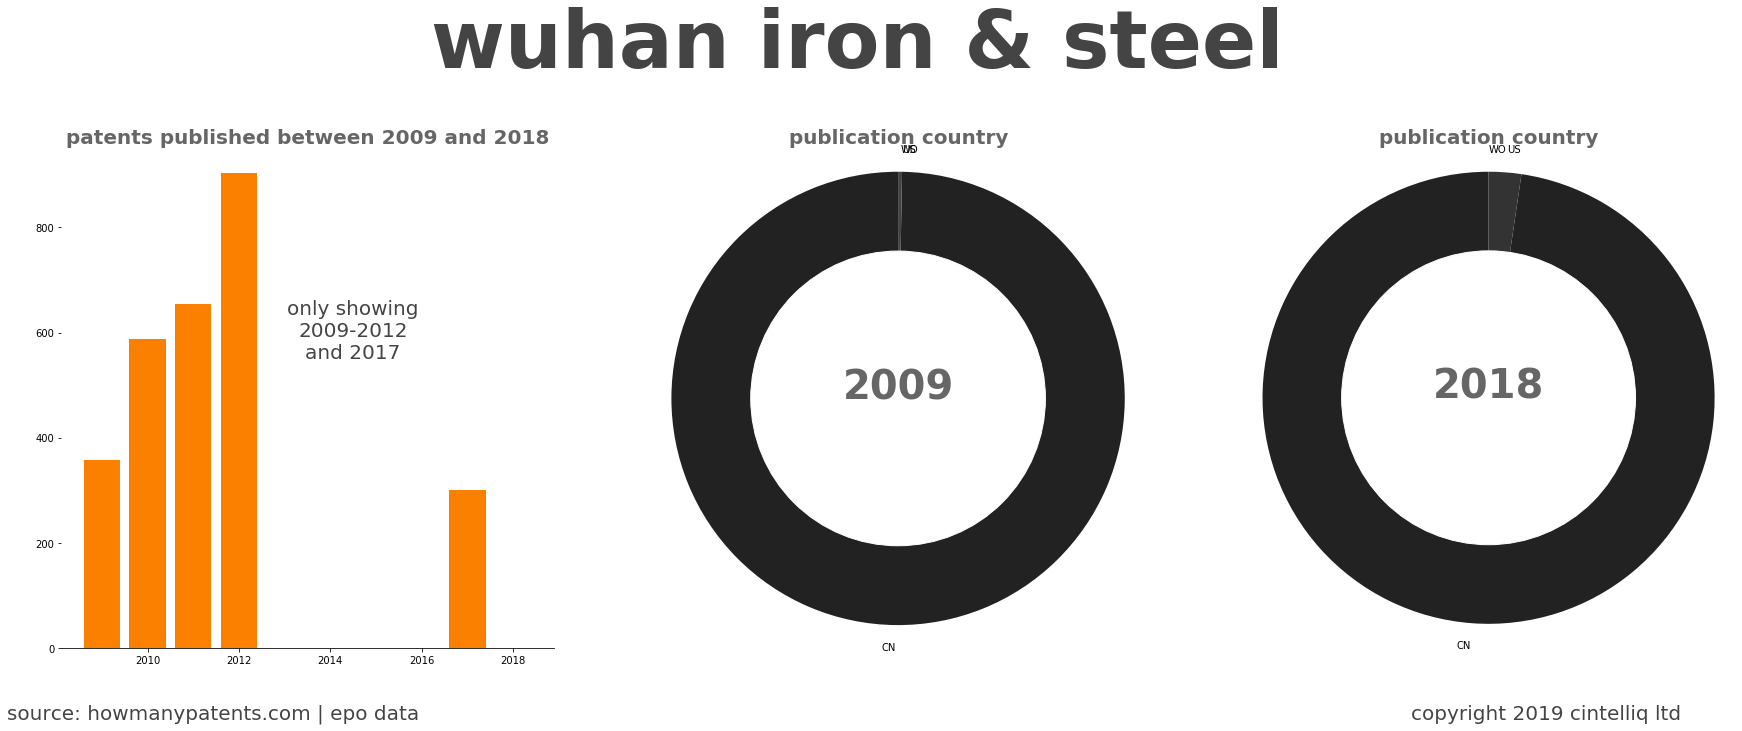 summary of patents for Wuhan Iron & Steel 